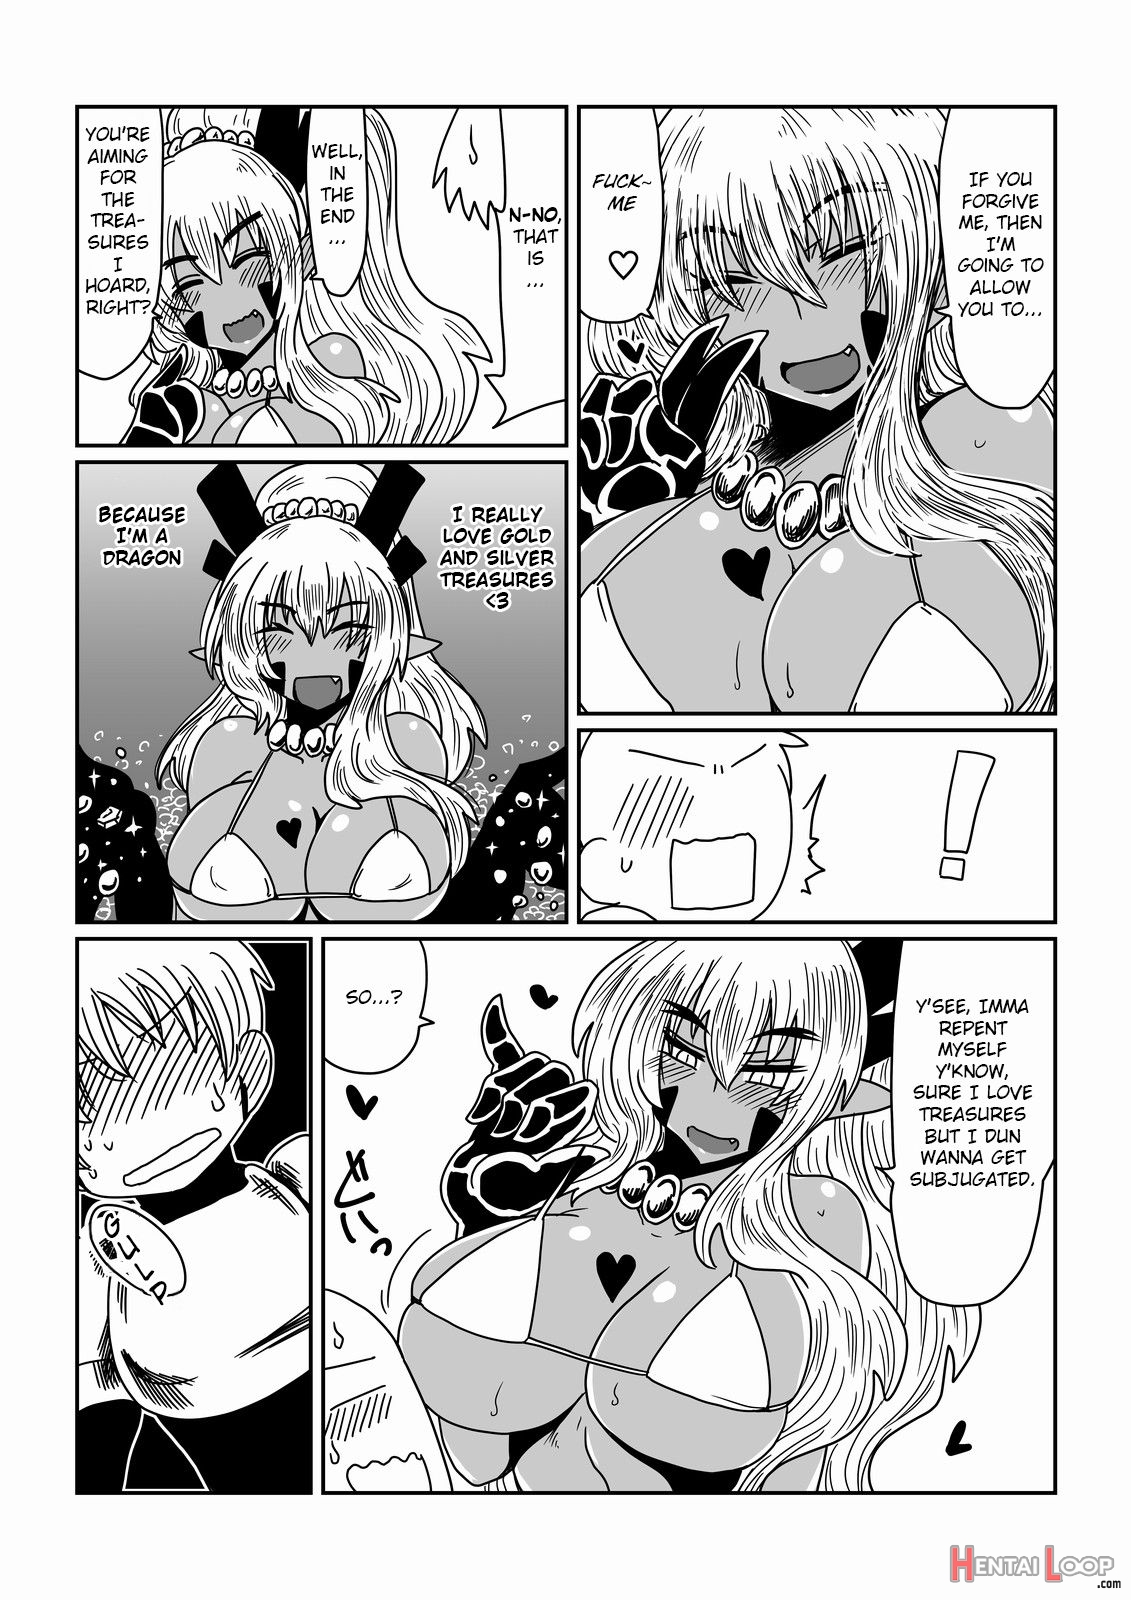 Read Gal De Dragon. (by Hroz) - Hentai doujinshi for free at HentaiLoop